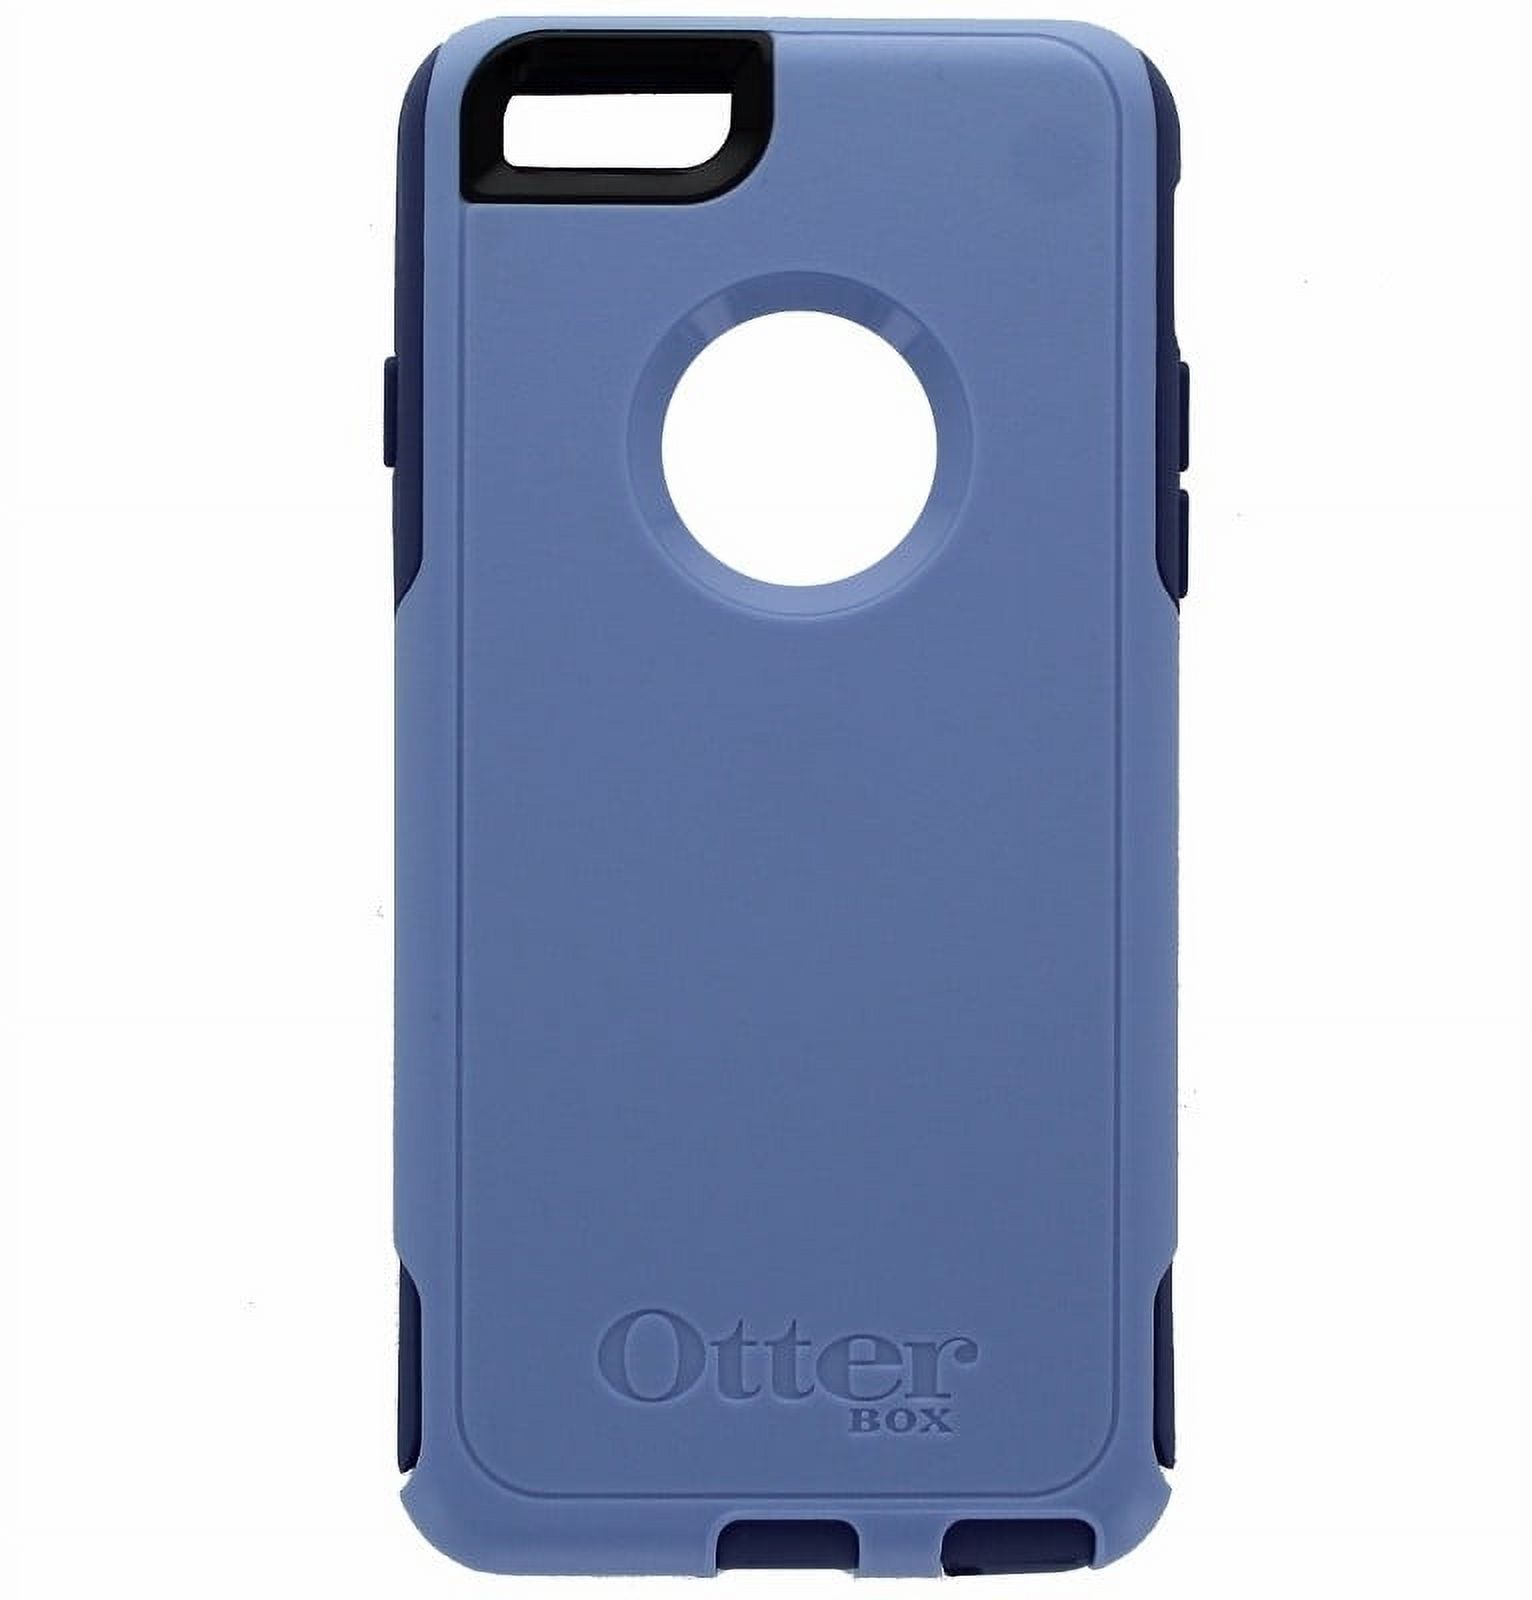 OtterBox Commuter Case for Apple iPhone 6 4.7 inch - Purple *Cover OEM Original (Used) - image 1 of 2